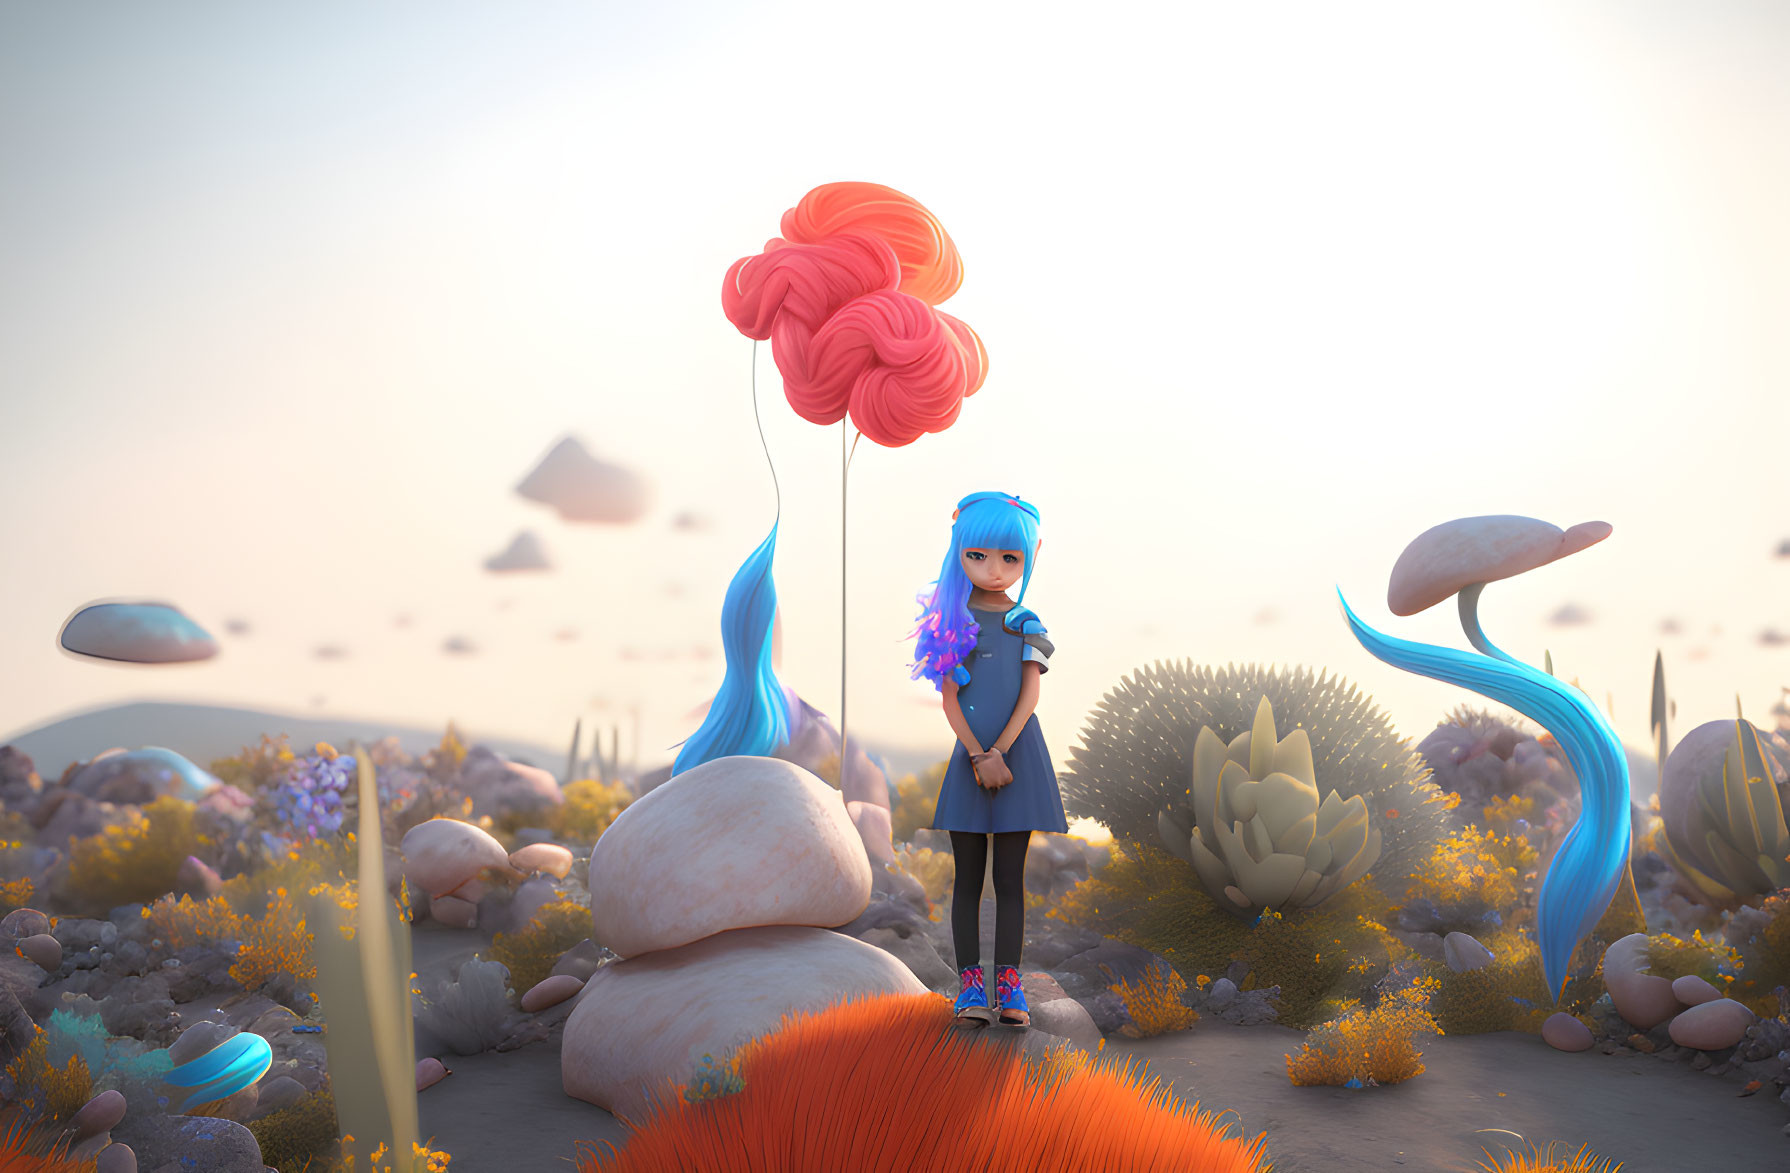 Blue-haired girl with pink balloon in mystical landscape